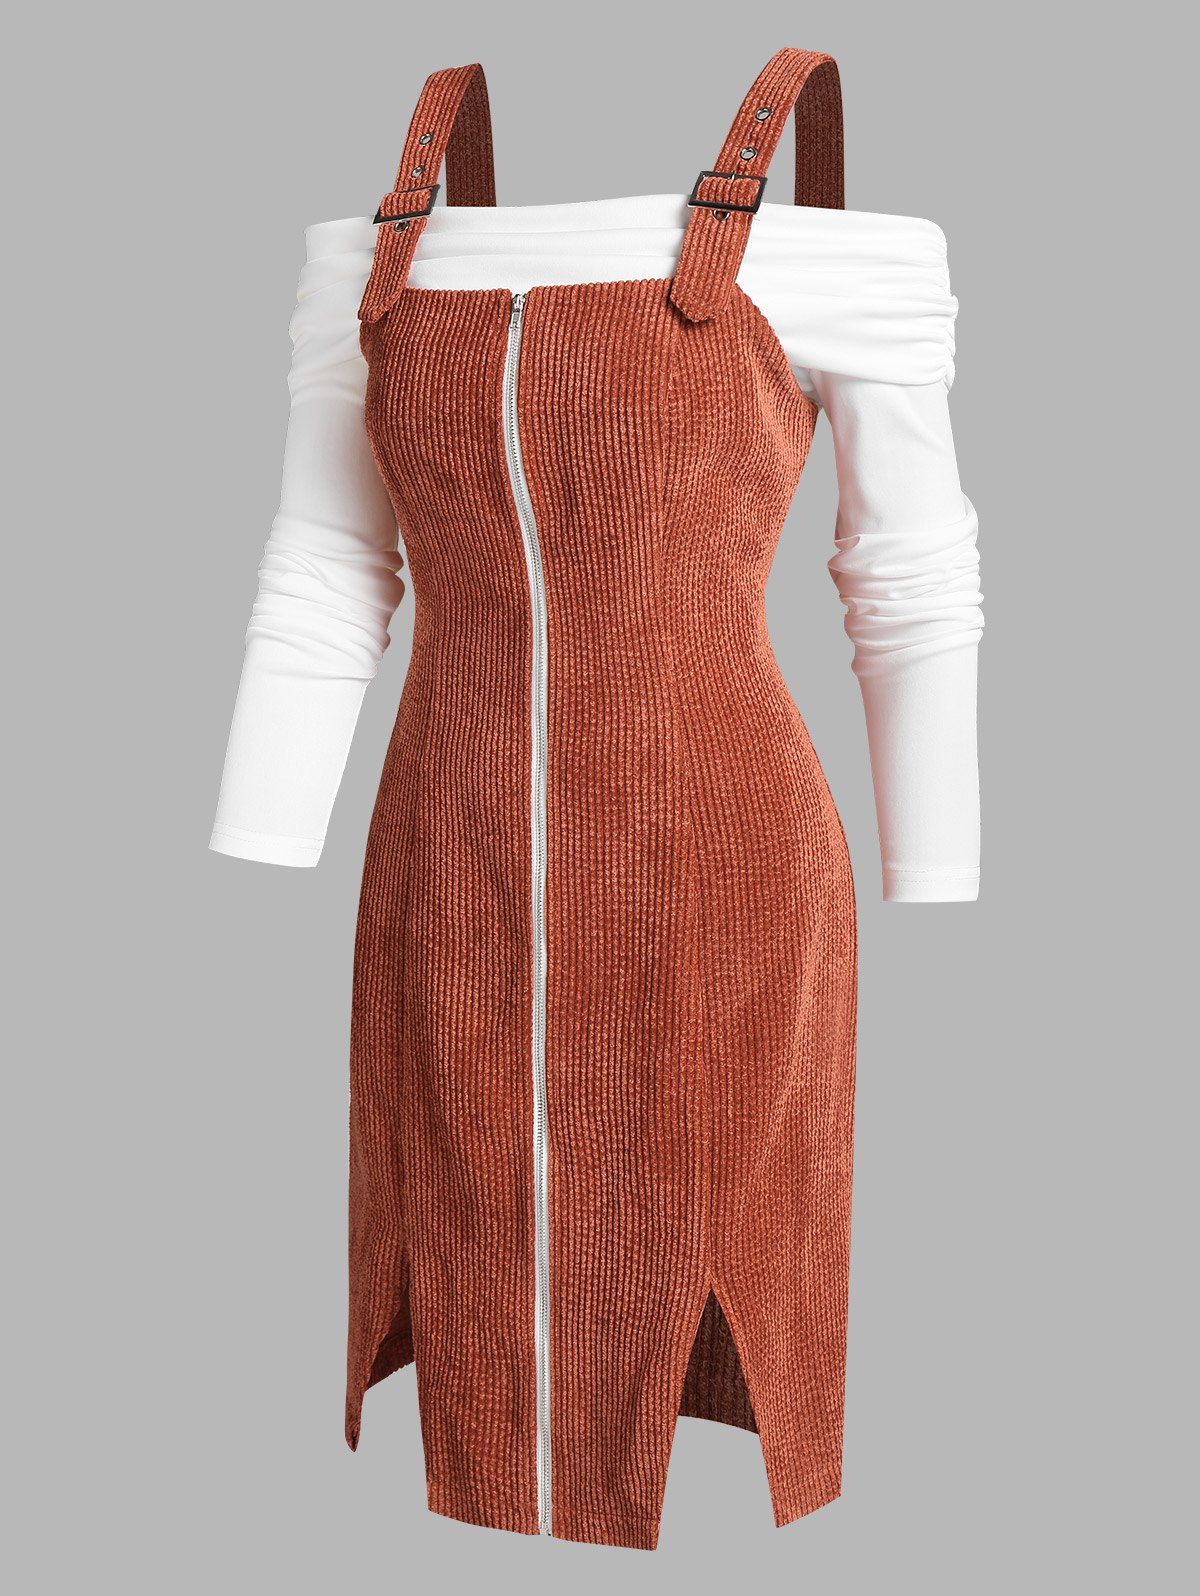 Sleeveless Zip Up Corduroy Dress and Off The Shoulder T-shirt - COFFEE L